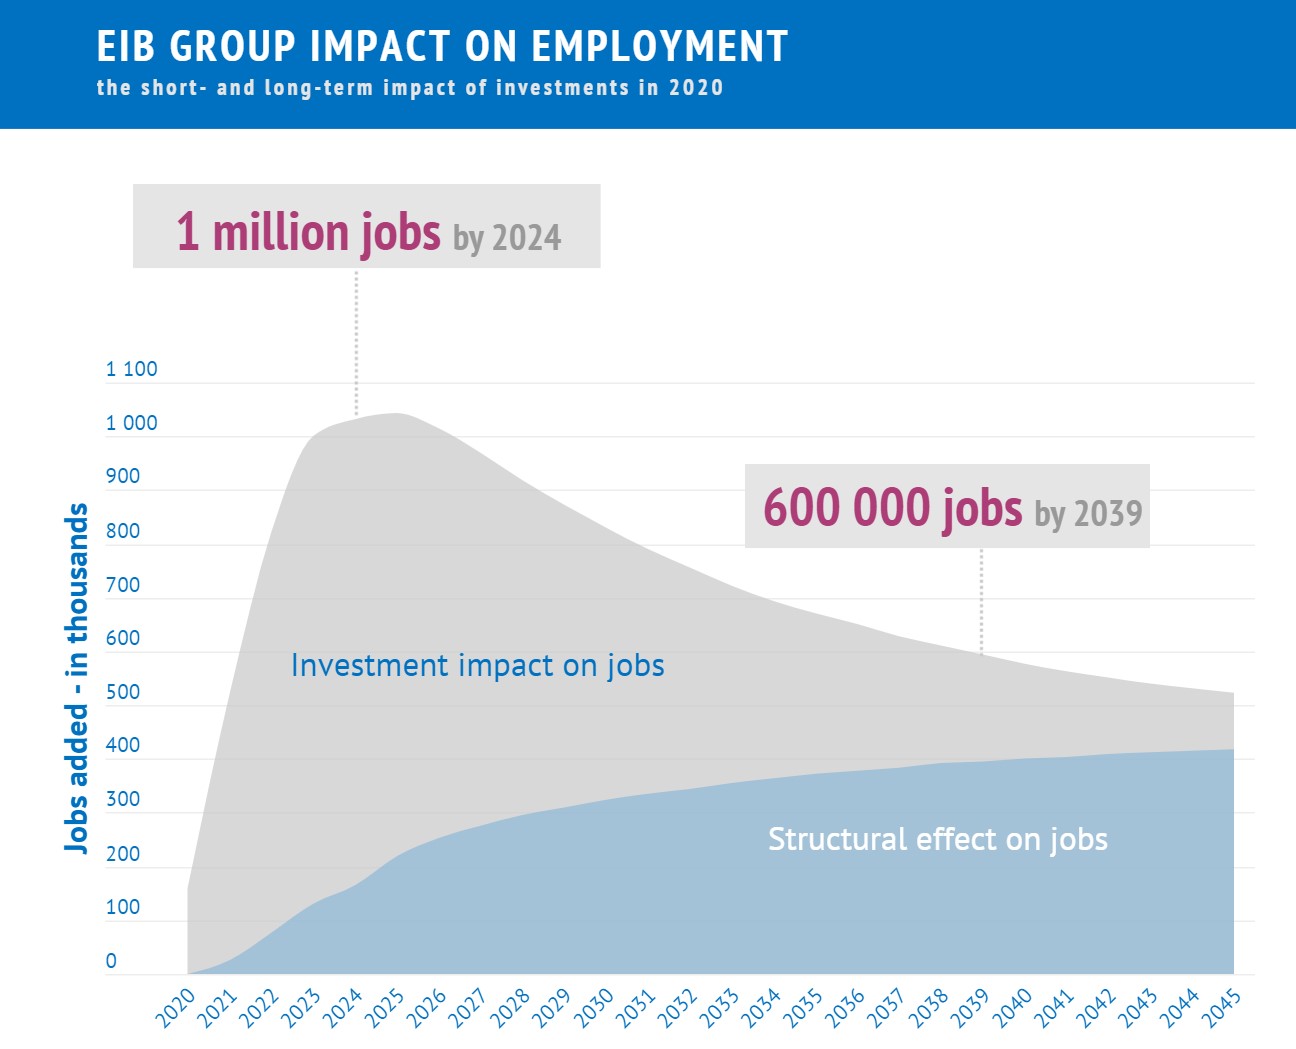 Our impact on employment - the short- and long-term impact of investments in 2020